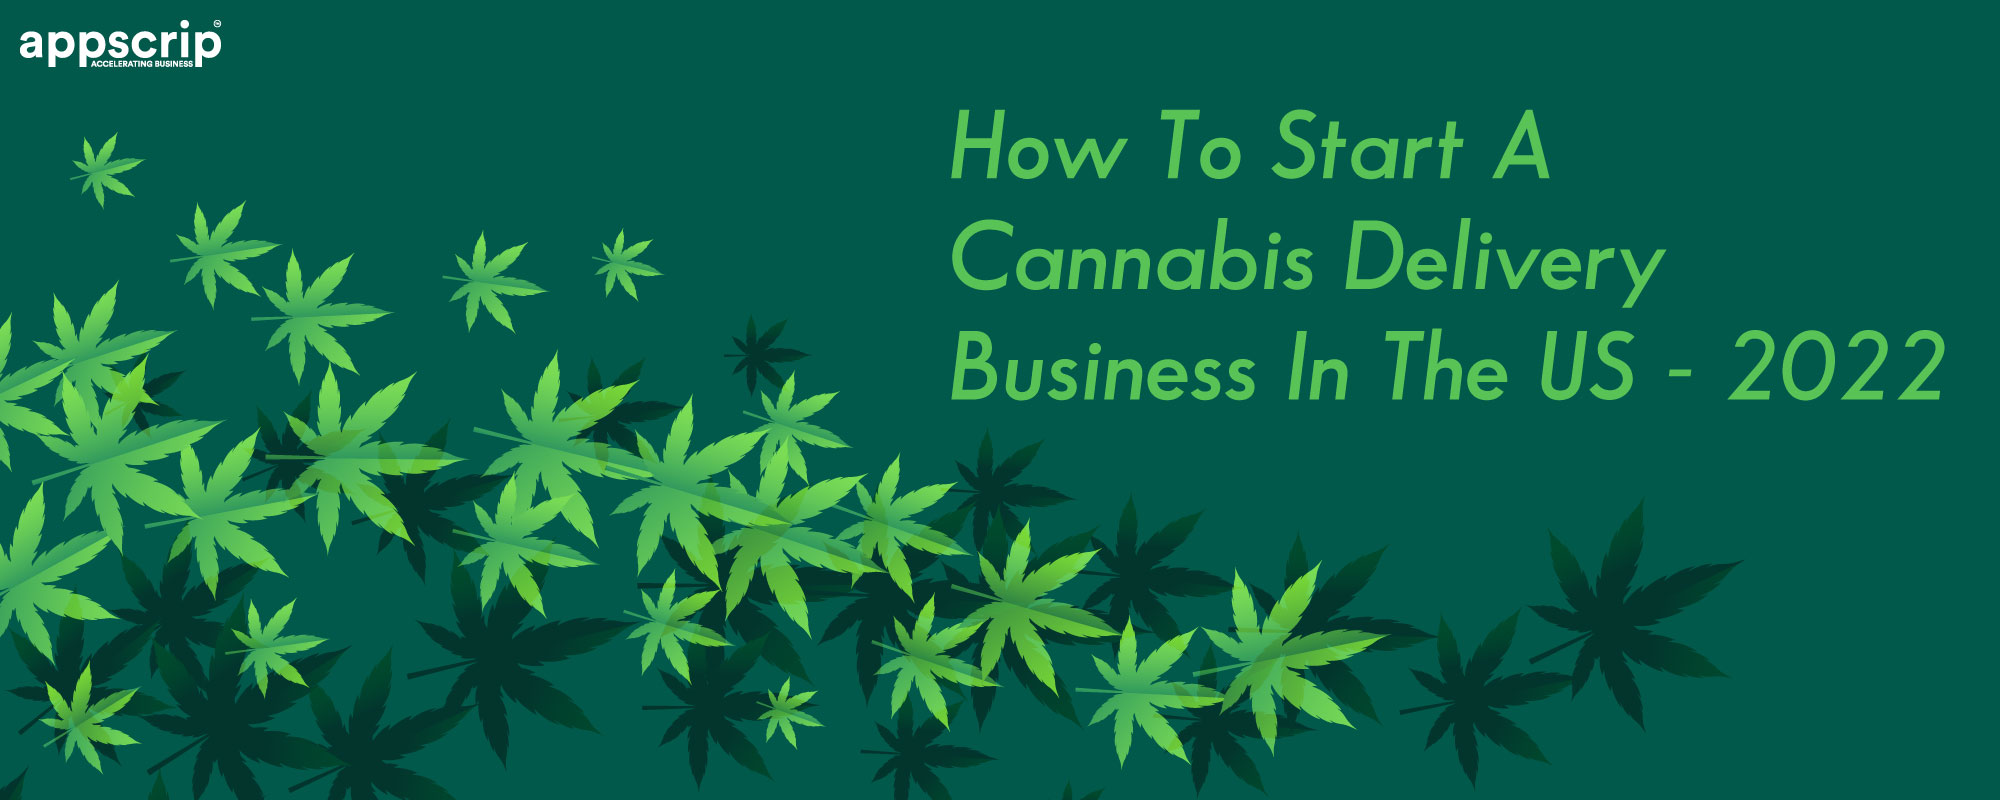 How to start a cannabis delivery business in the US 2022